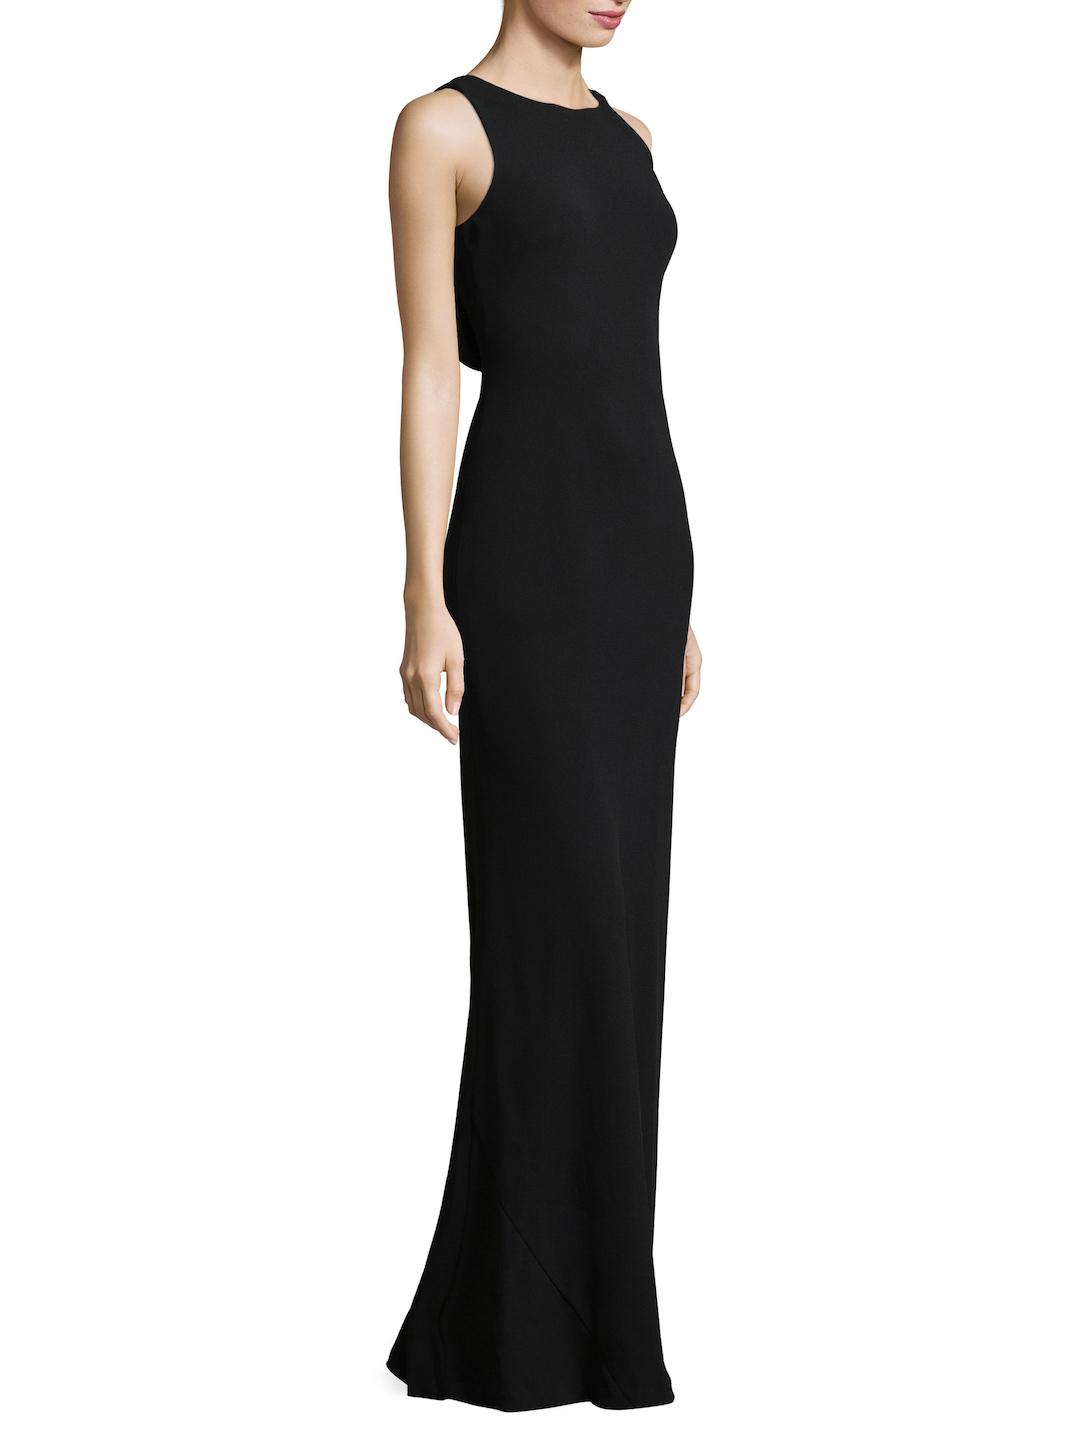 Karl Lagerfeld Synthetic Drape Back Gown in Black/Red (Black) - Lyst